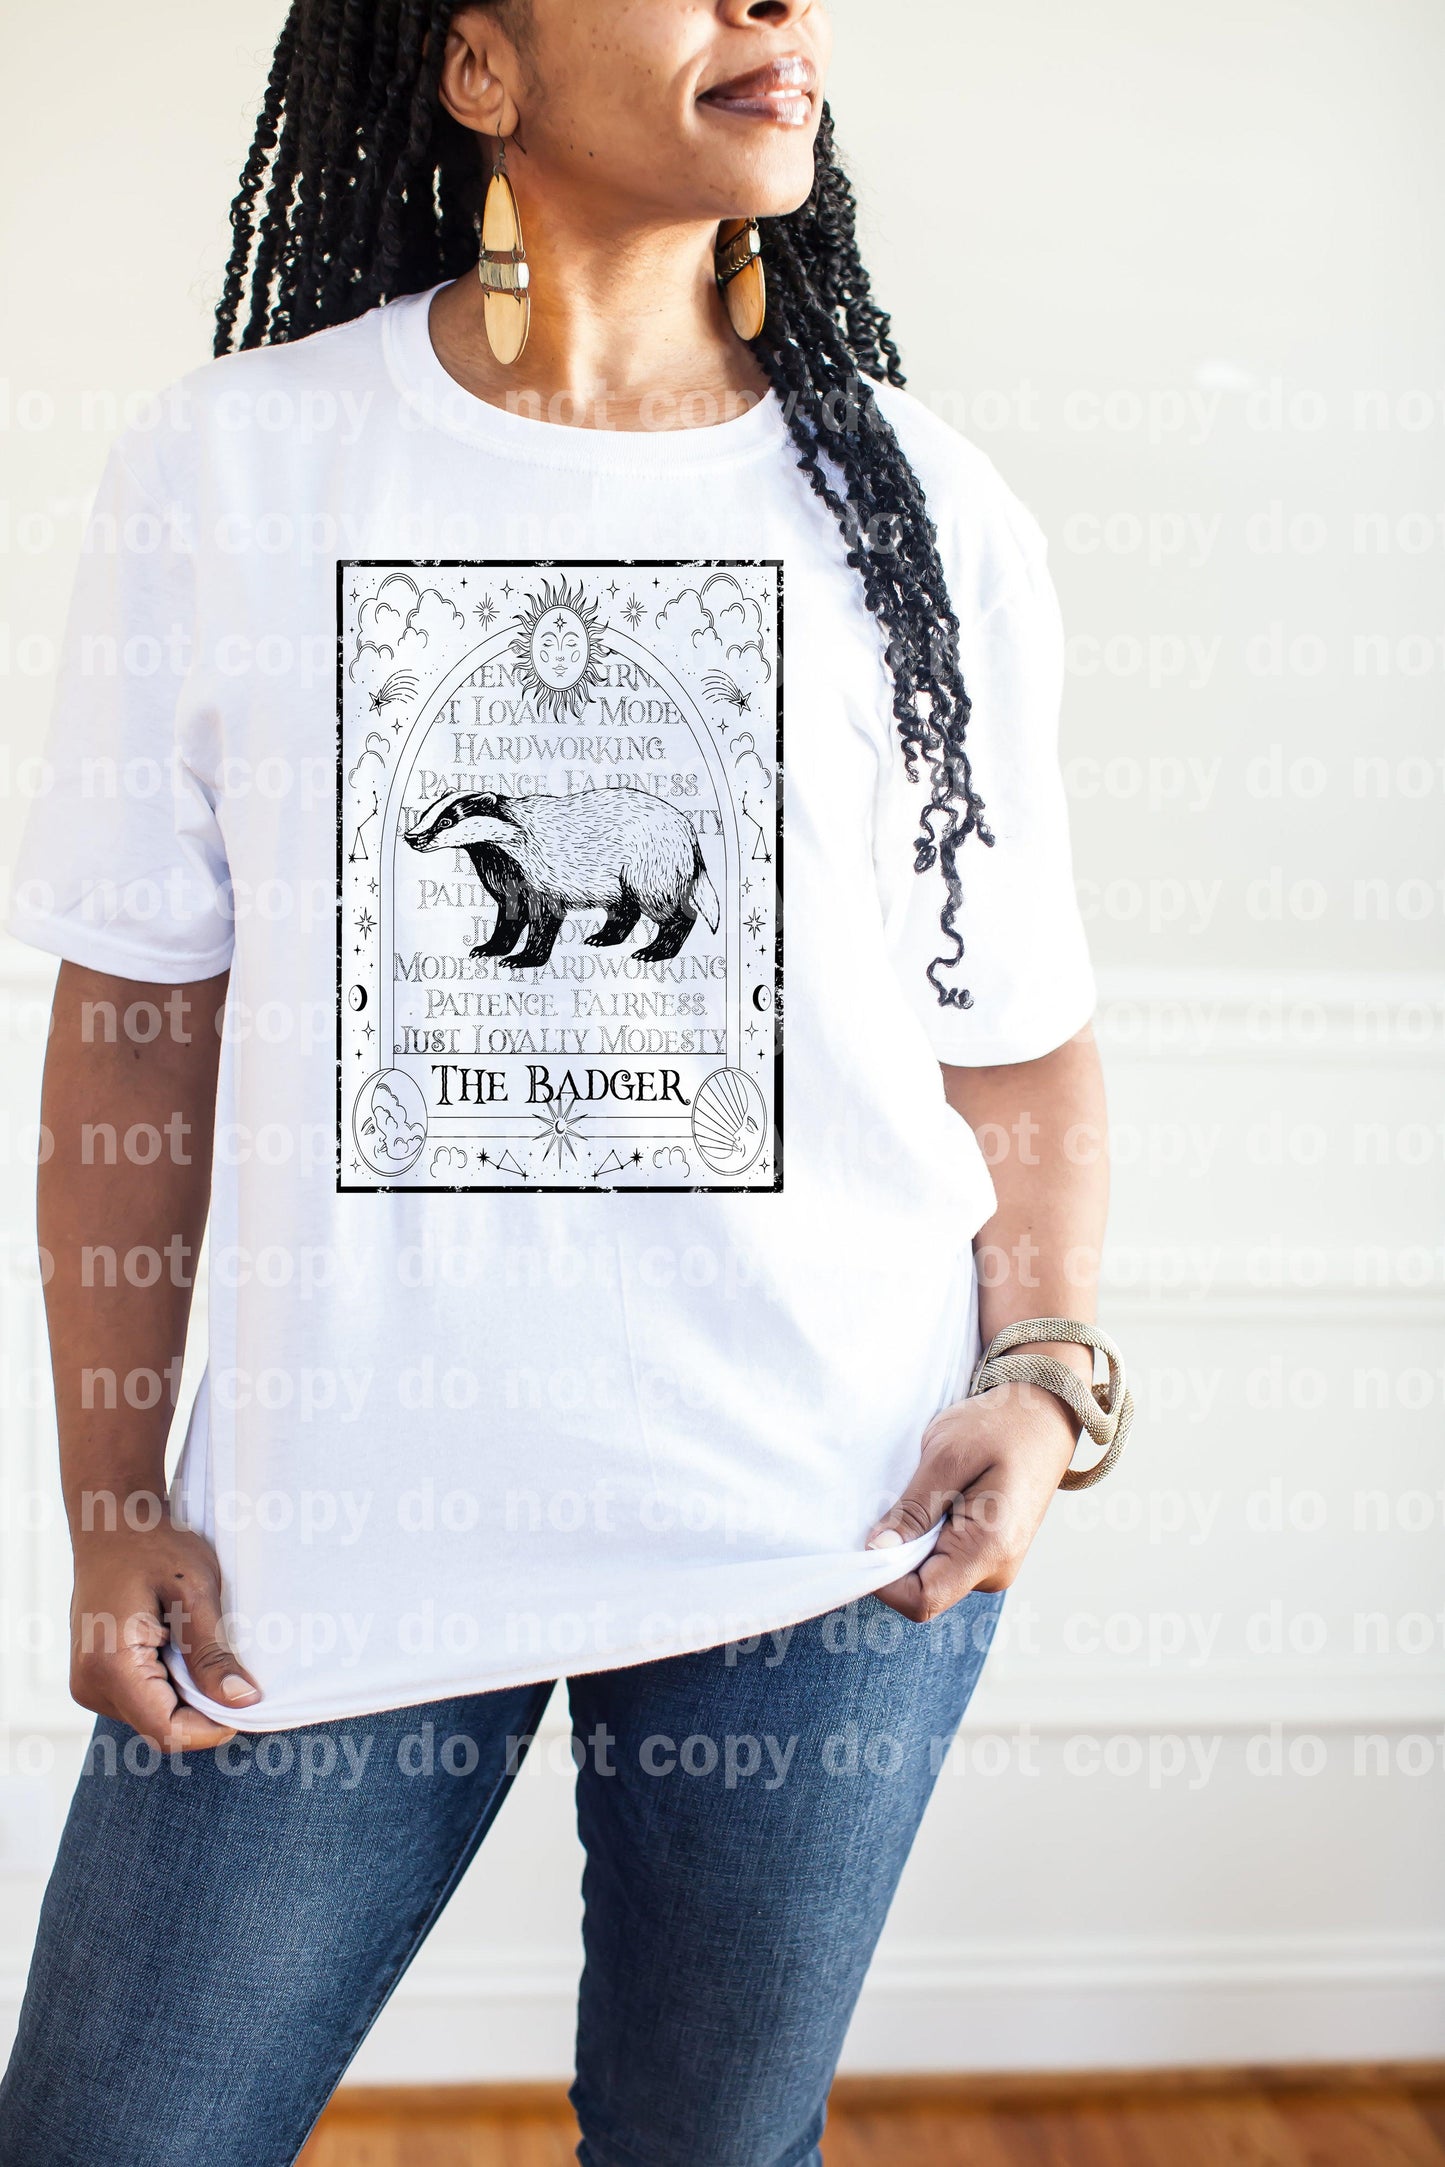 The Badger Hardworking Patience Fairness Loyalty Modesty Dream Print or Sublimation Print